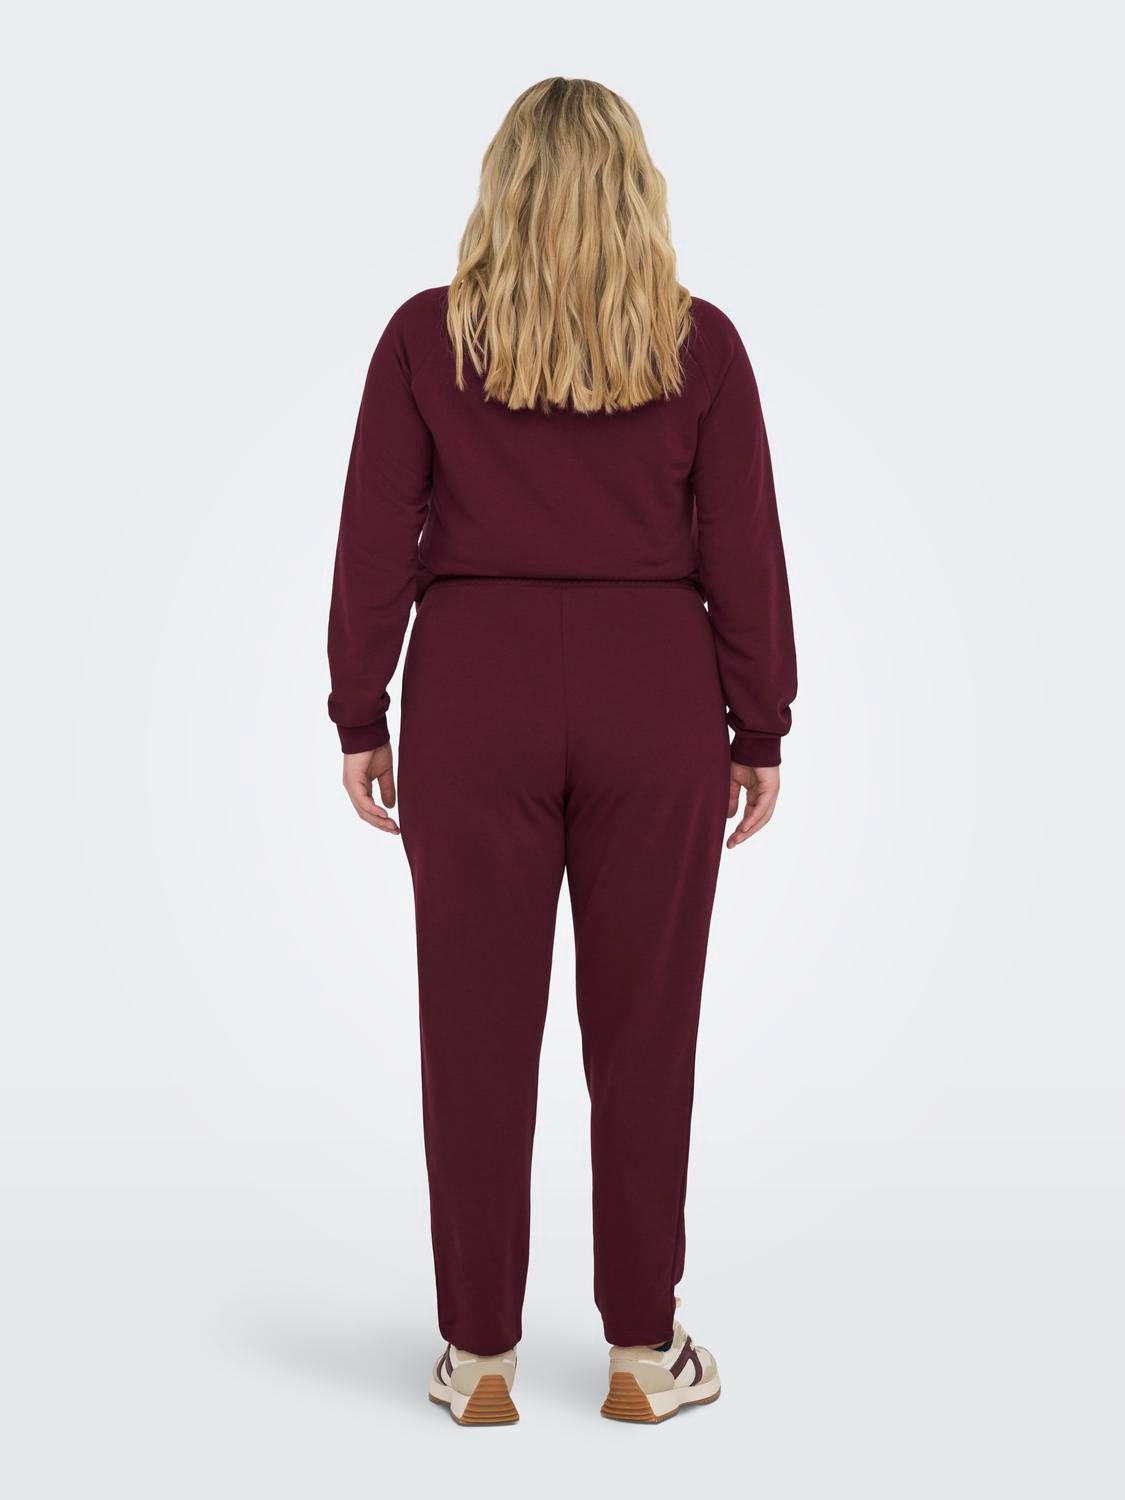 ONLY Curvy Training trousers -Windsor Wine - 15306633